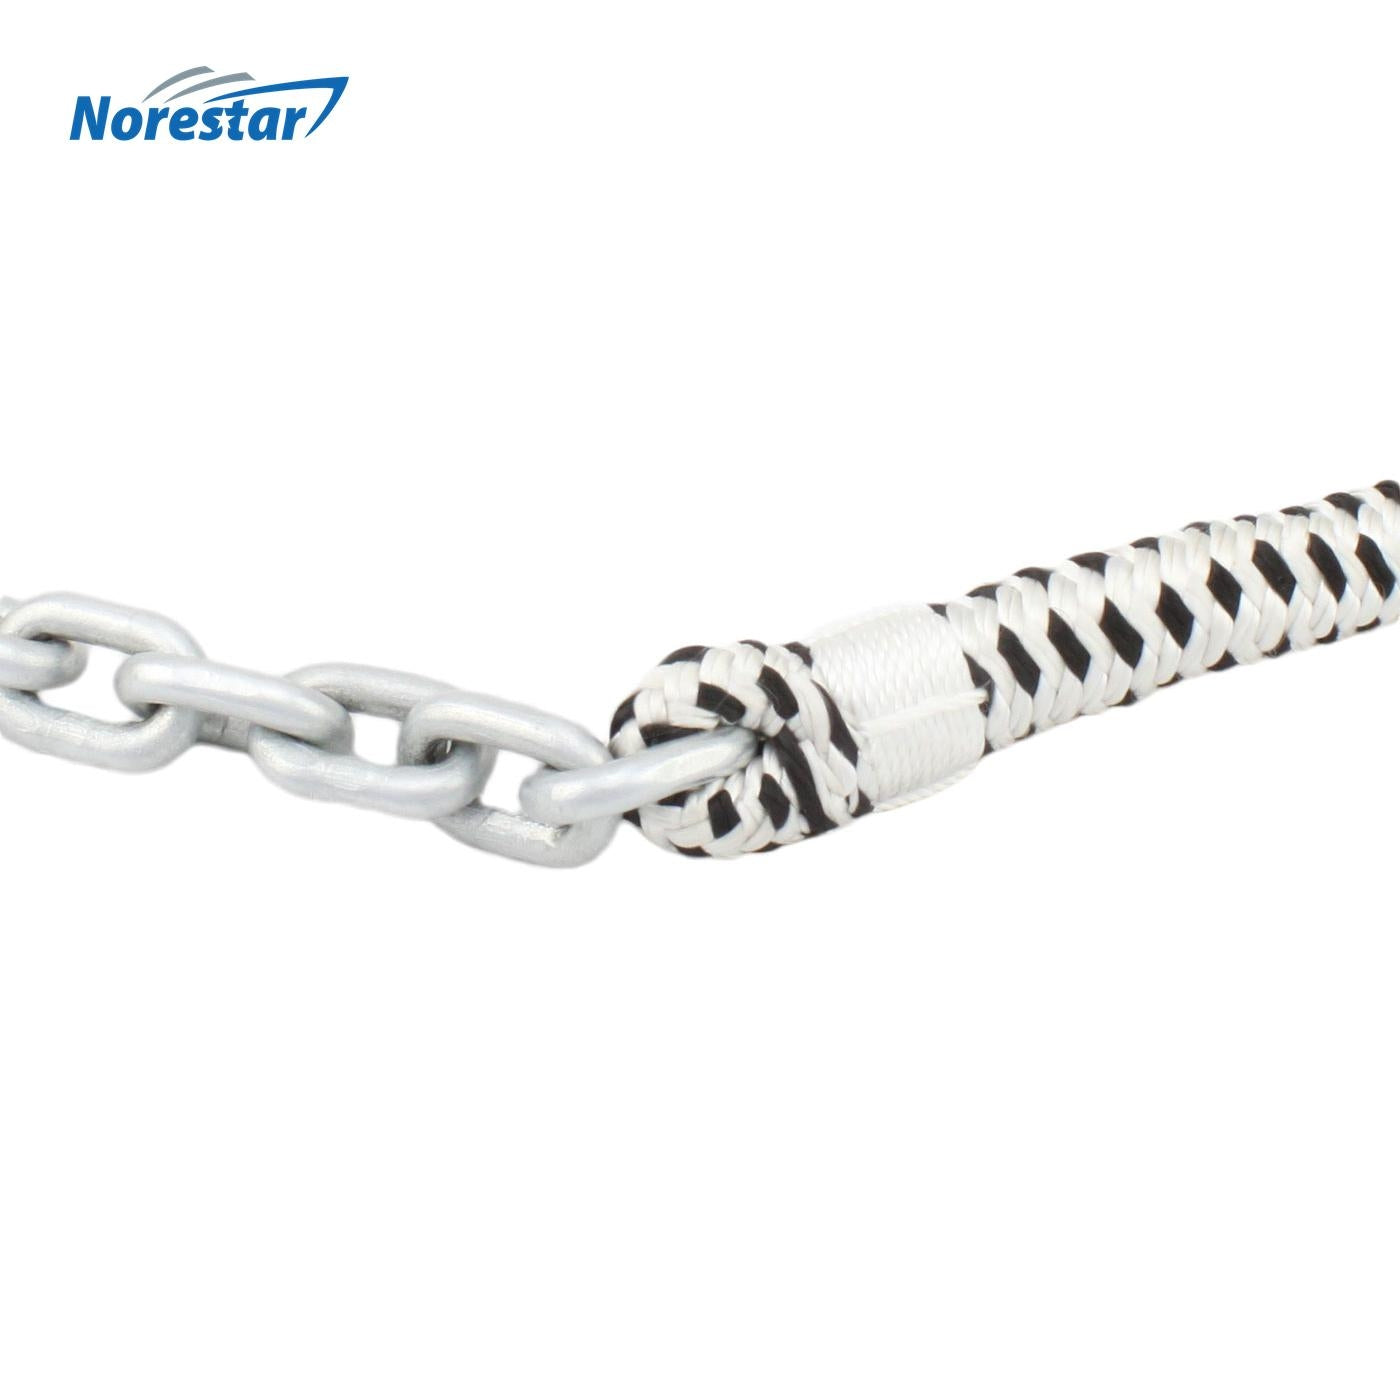 Braided Nylon Anchor Rope Spliced with HT G4 Chain (Windlass Rope) - Splice